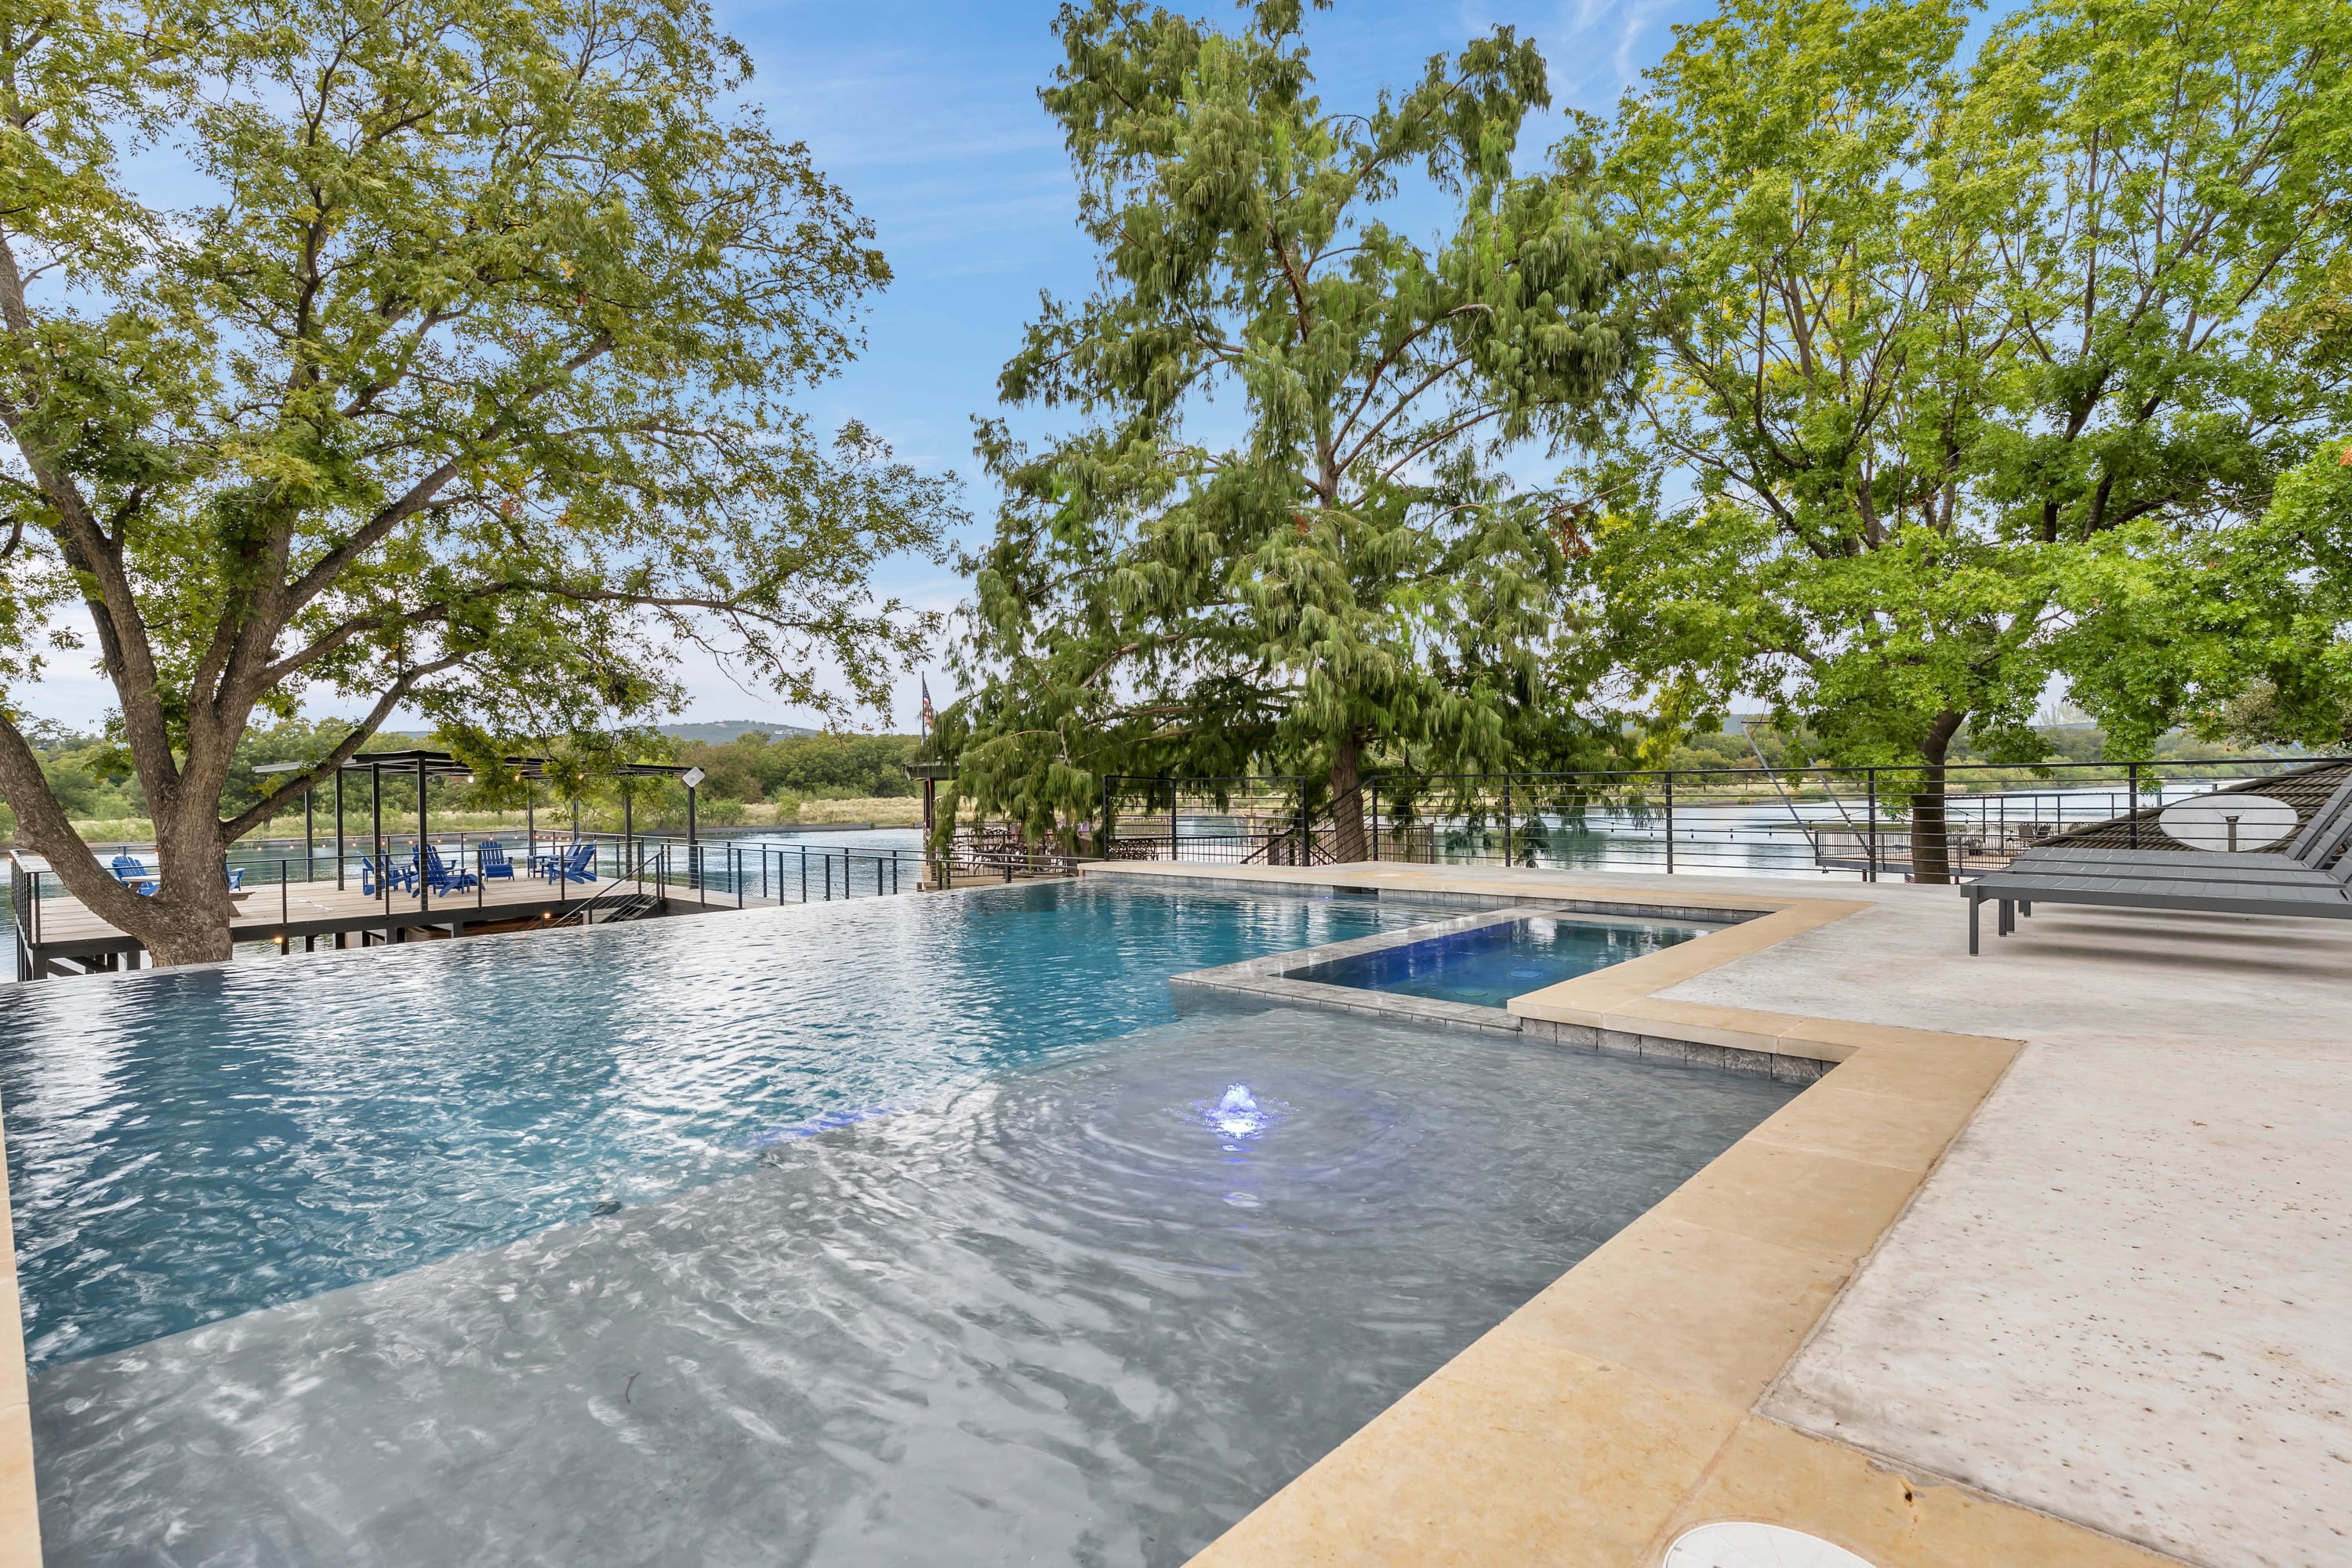 All the Amenities: Pool, Hot Tub, Waterfront, Game Room, Boat Lift